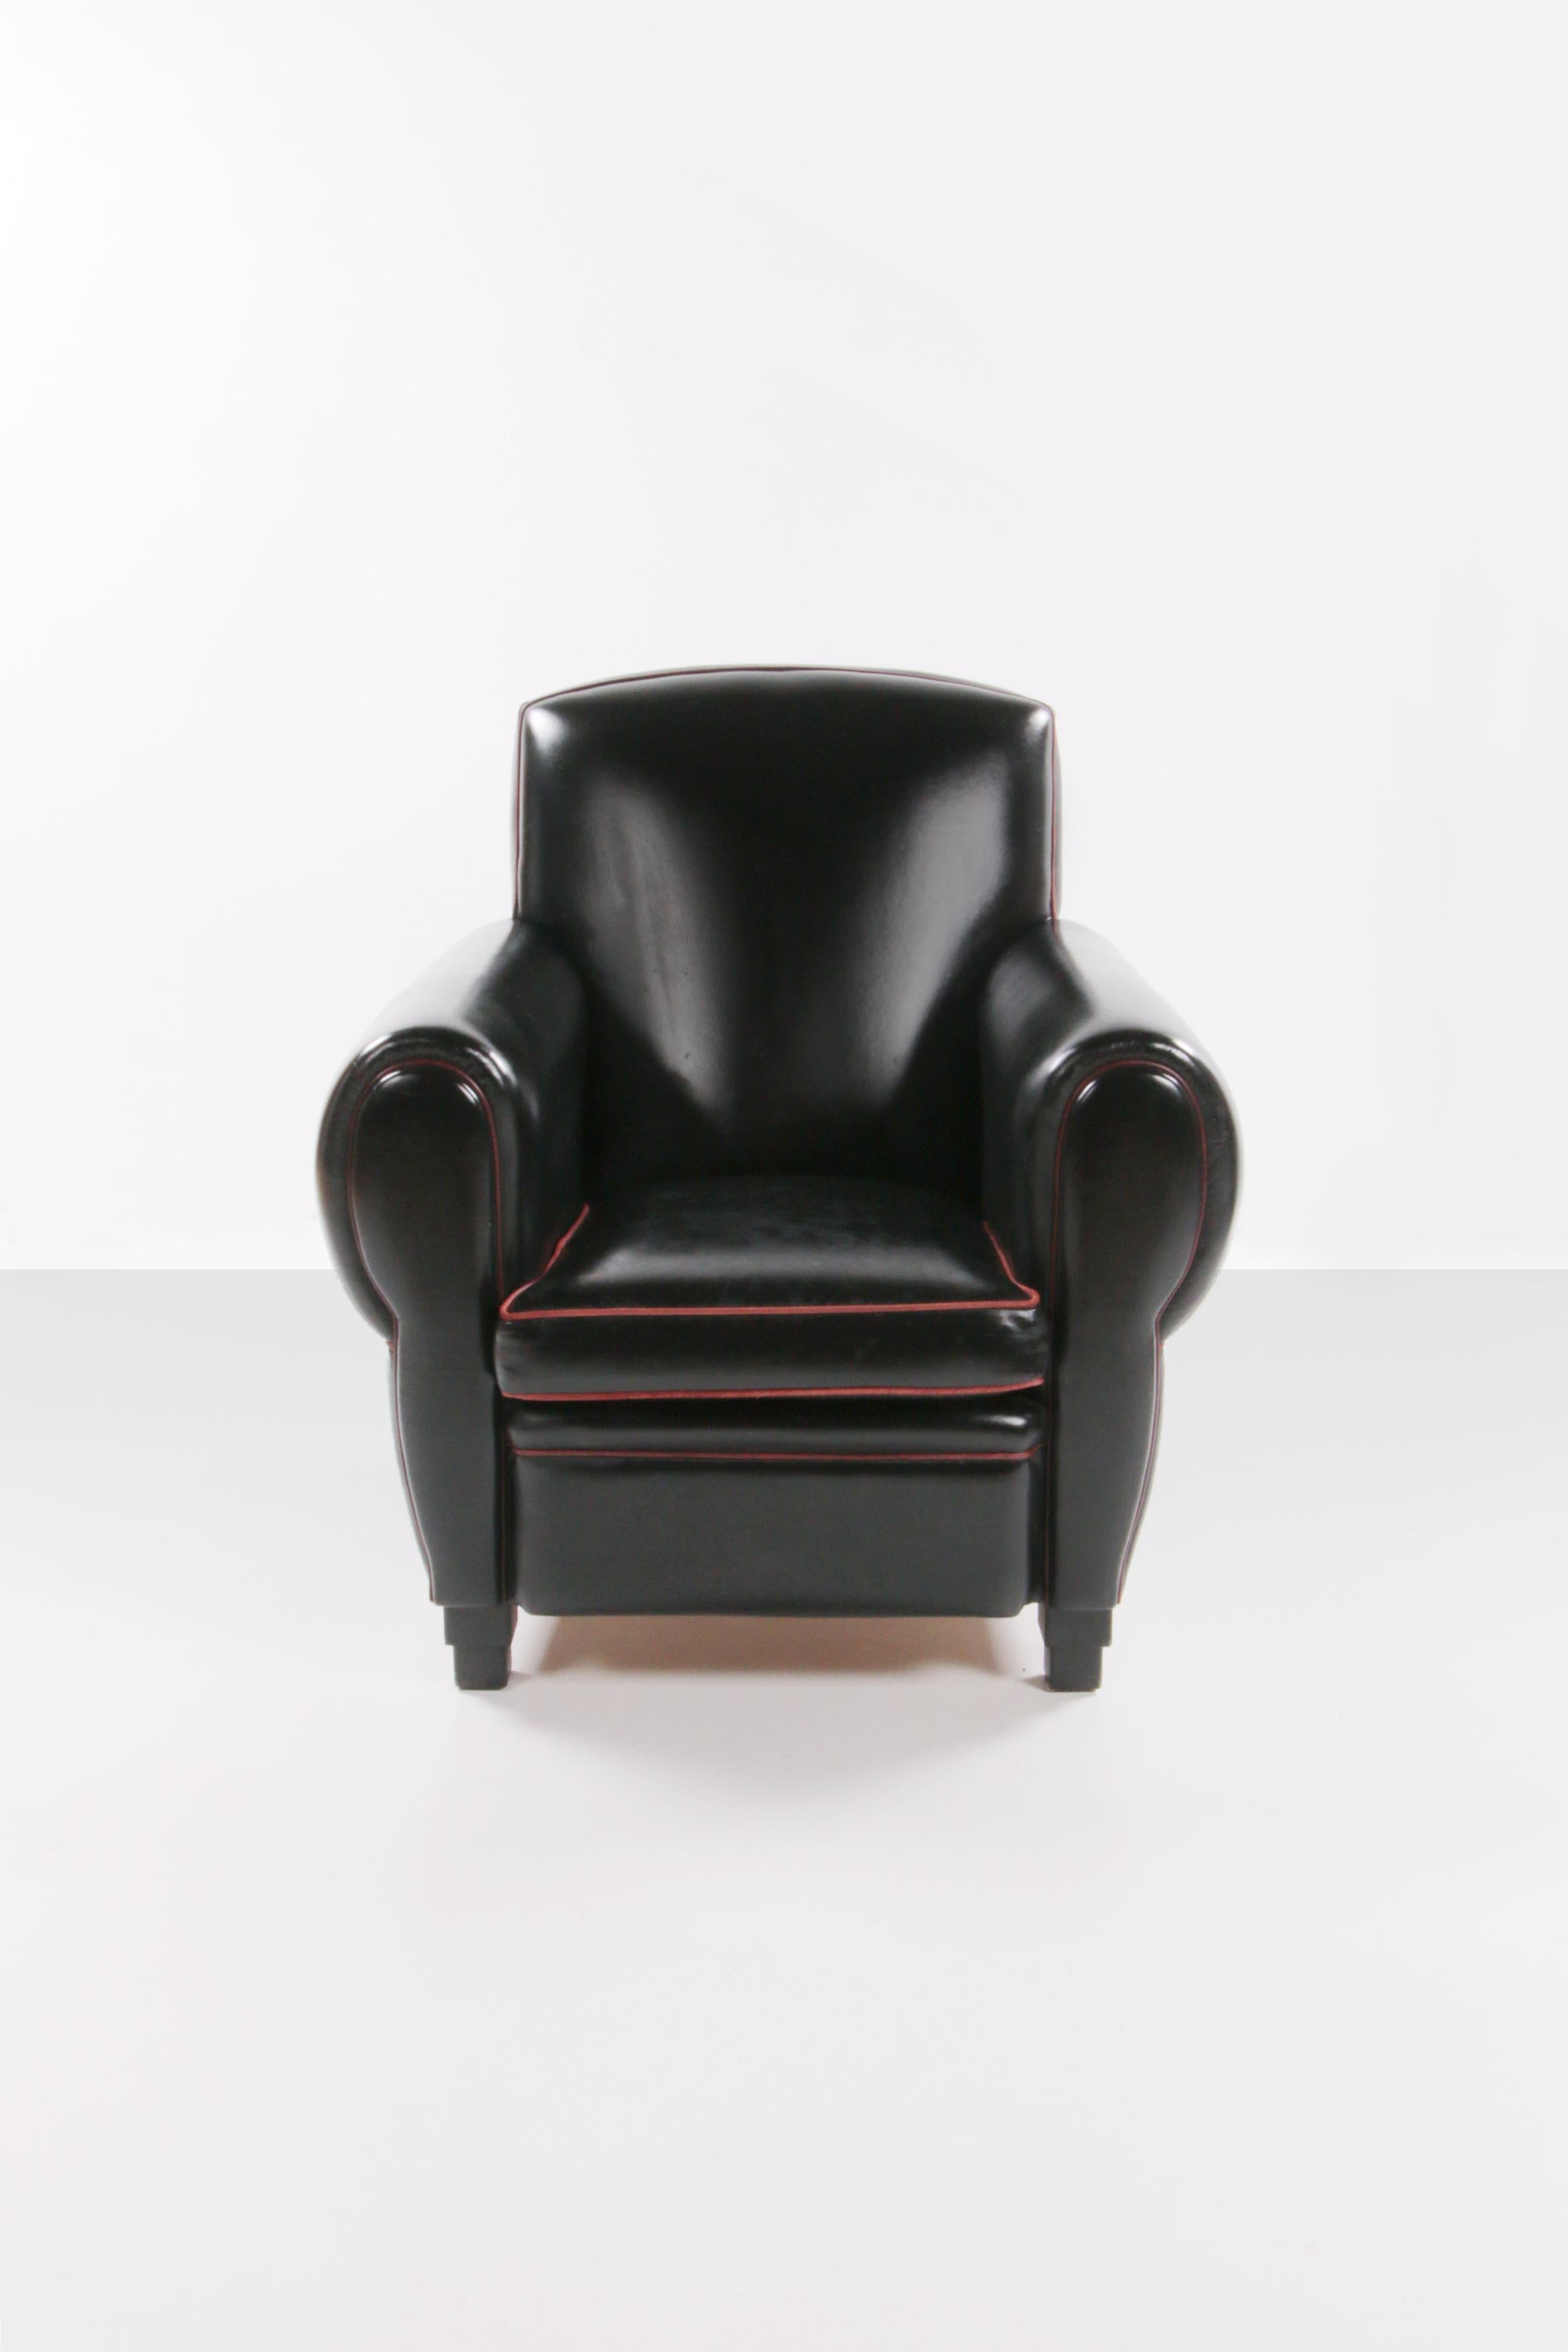 Dutch Very Comfortable and Beautiful Leather Armchair from LA Lounge Atelier For Sale